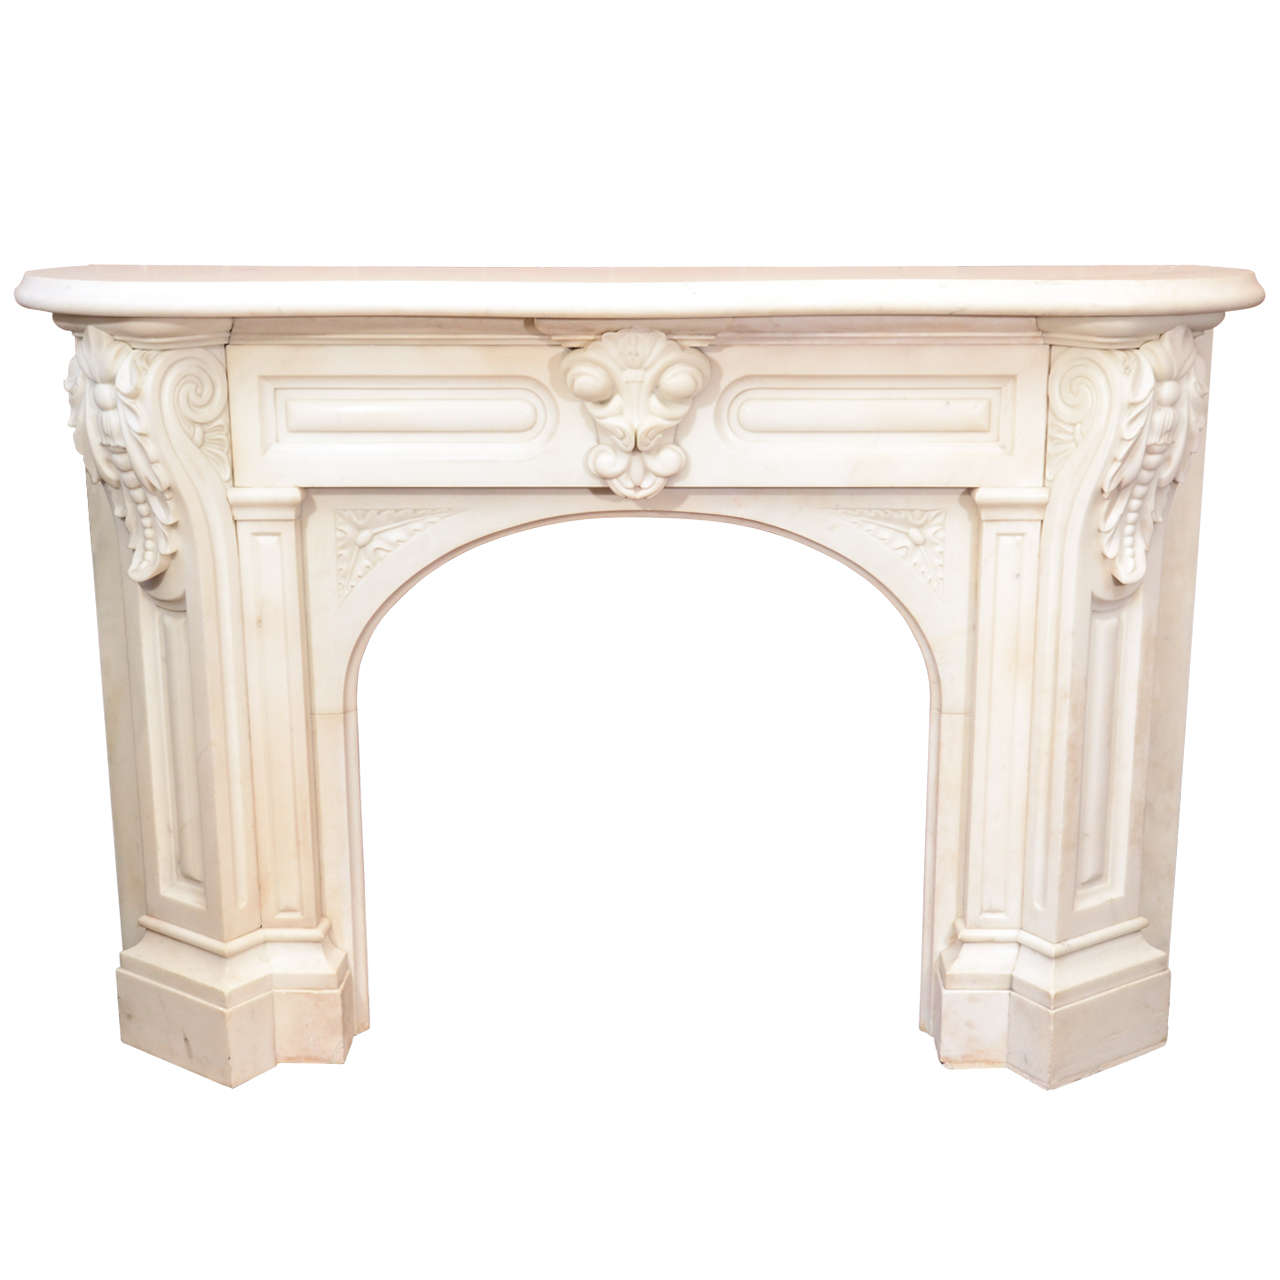 White Arched Victorian Mantel with Corbels